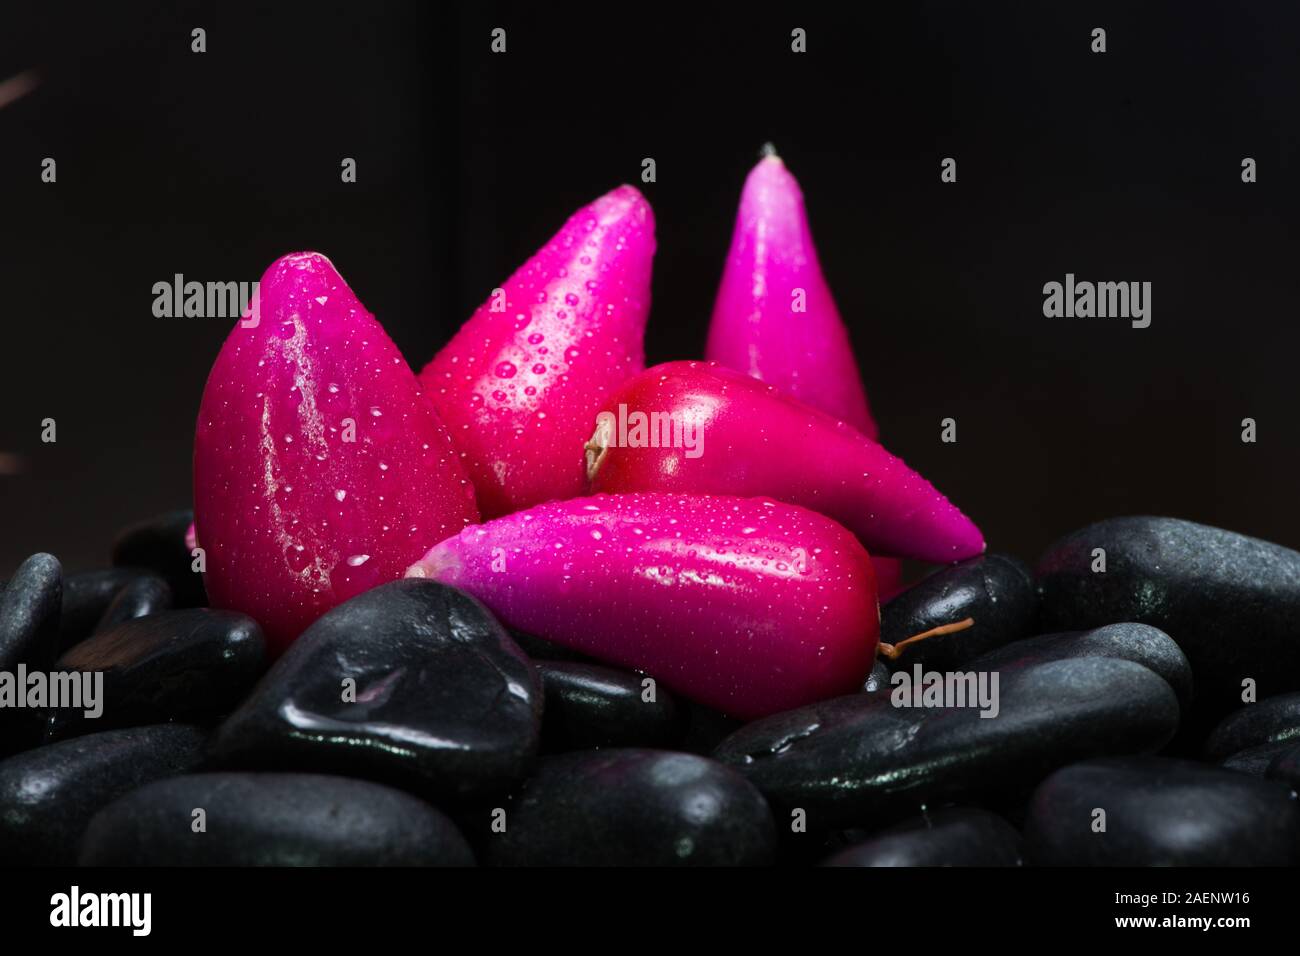 Pitiguey Food with Black stones Background Stock Photo